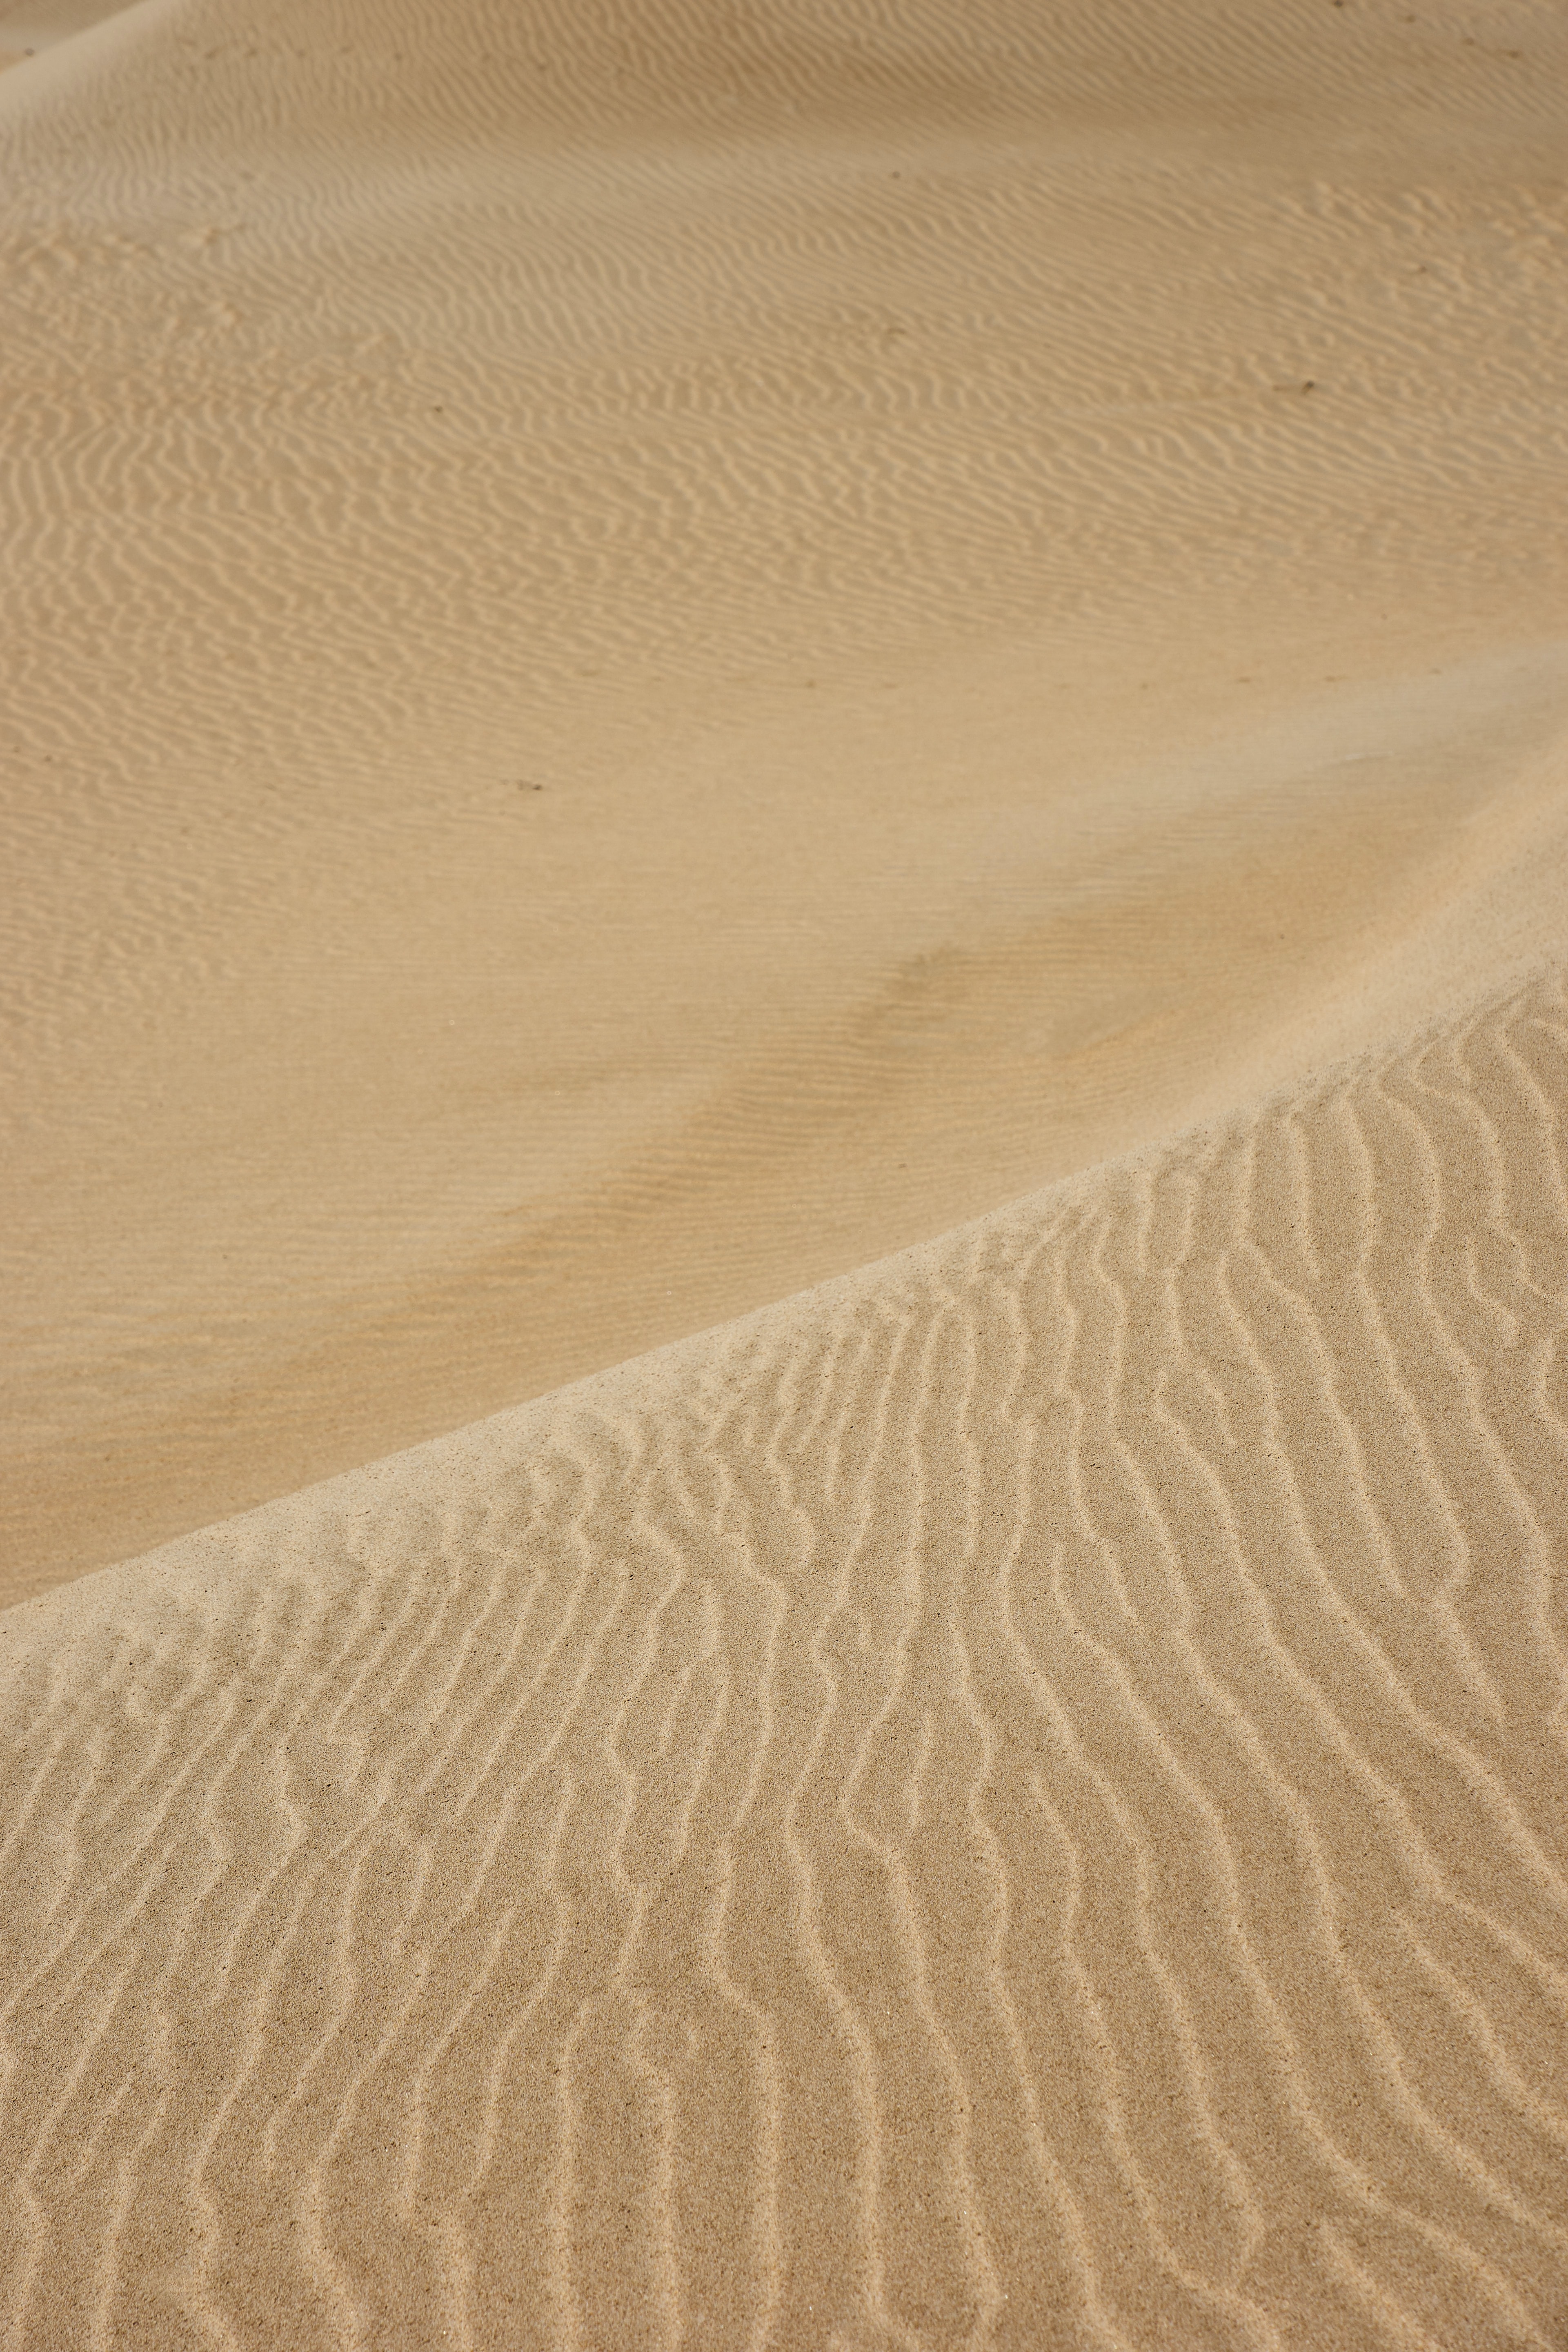 nature, waves, sand, desert, traces, dunes wallpapers for tablet